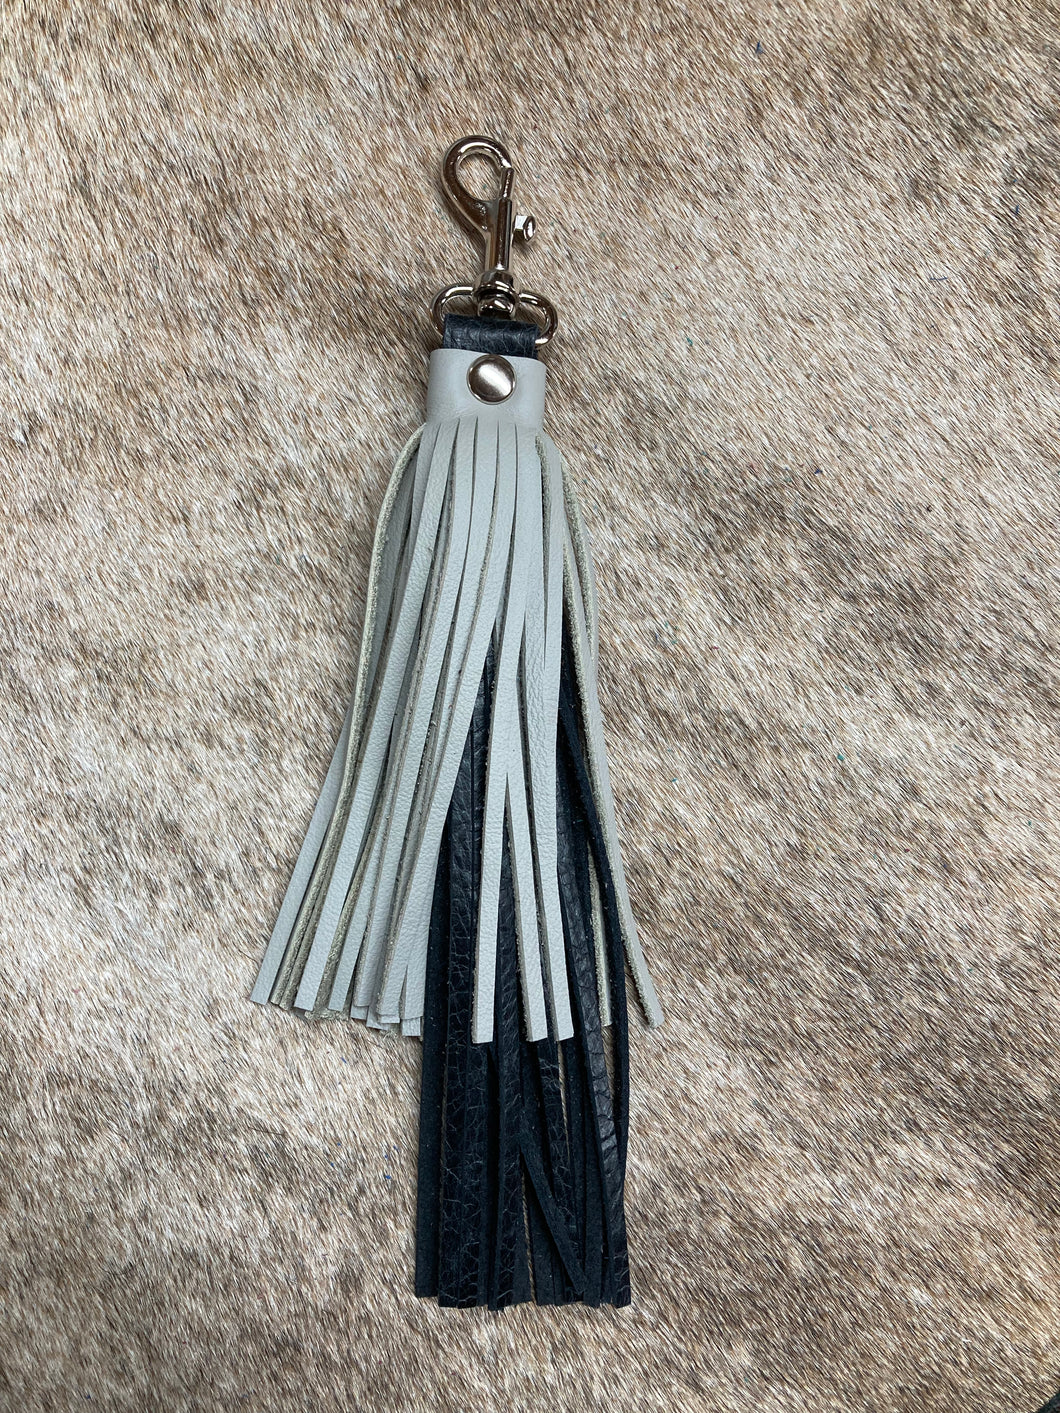 Purse Tassel - Black and Gray Leather